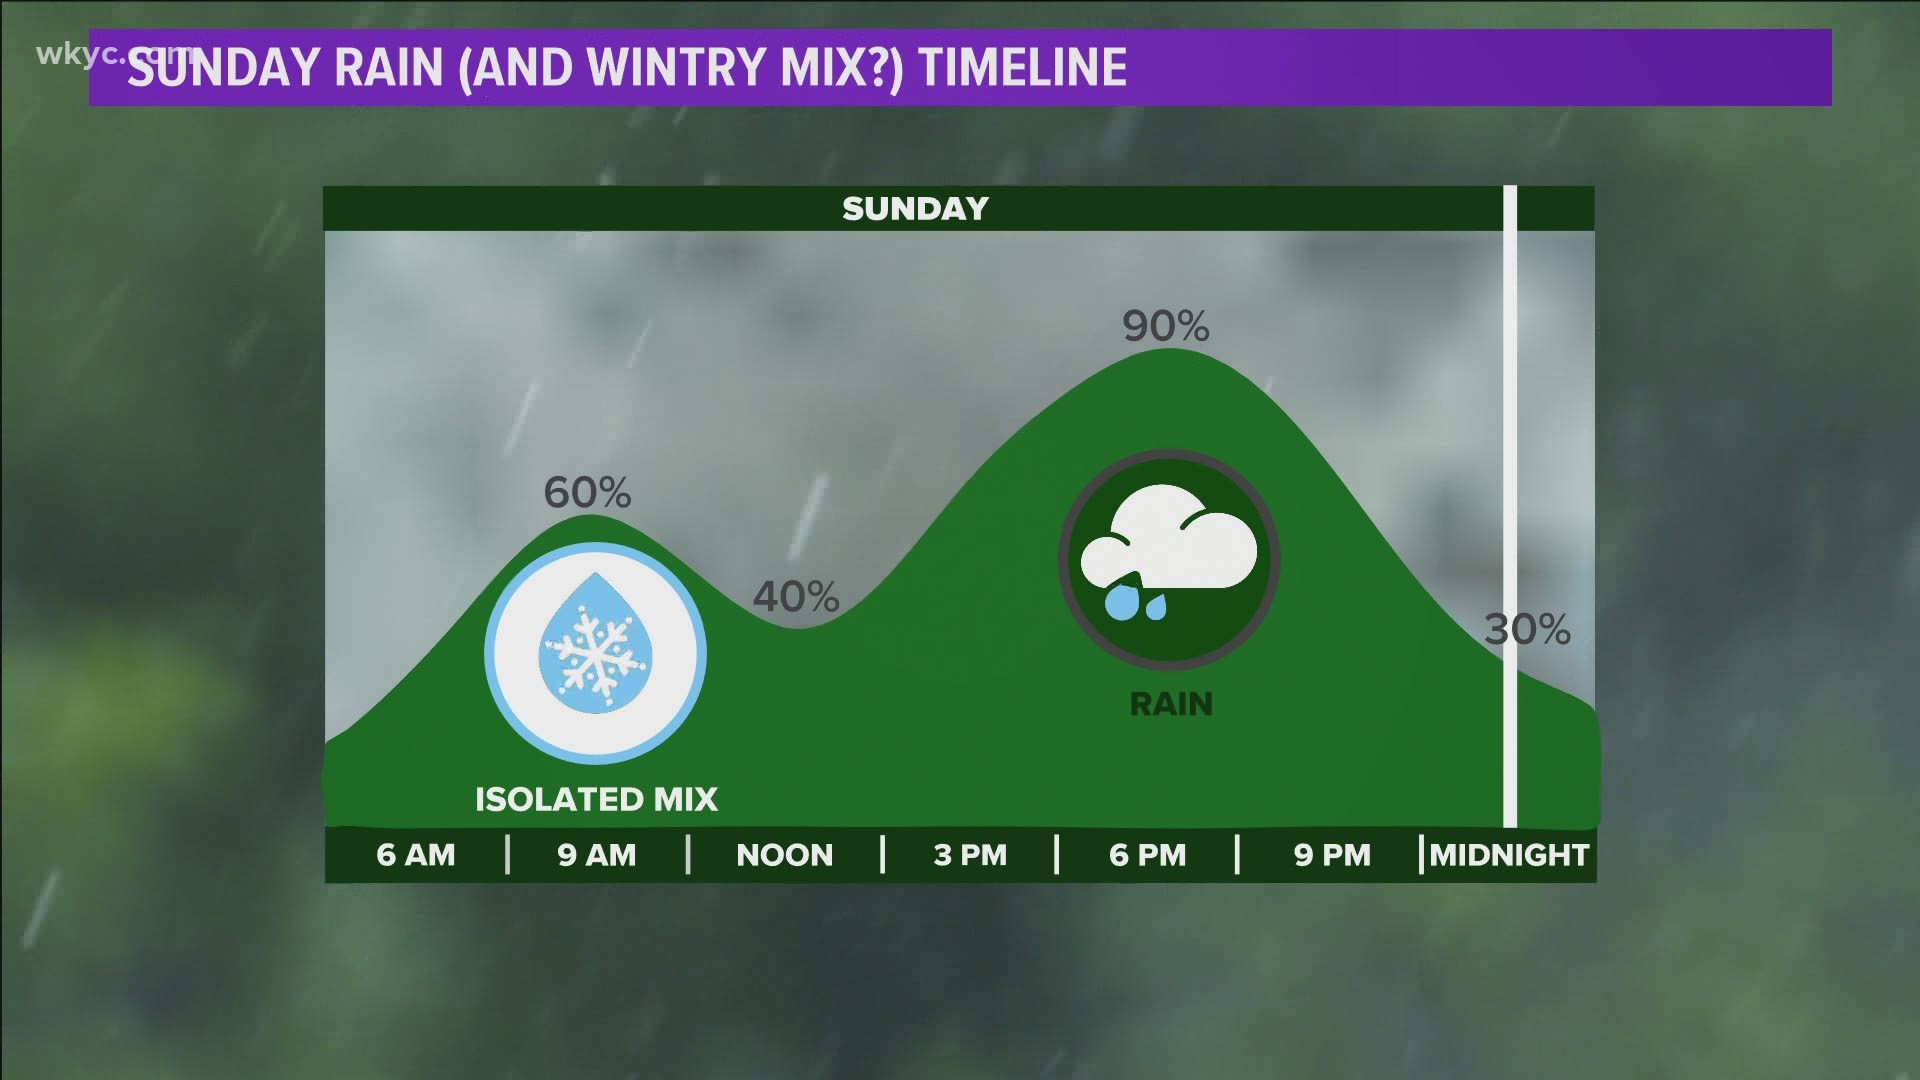 Sunday looks wet across NE Ohio. Rain will arrive before sunrise with a few pockets of wintry mix. We'll transition to all rain the rest of the day.